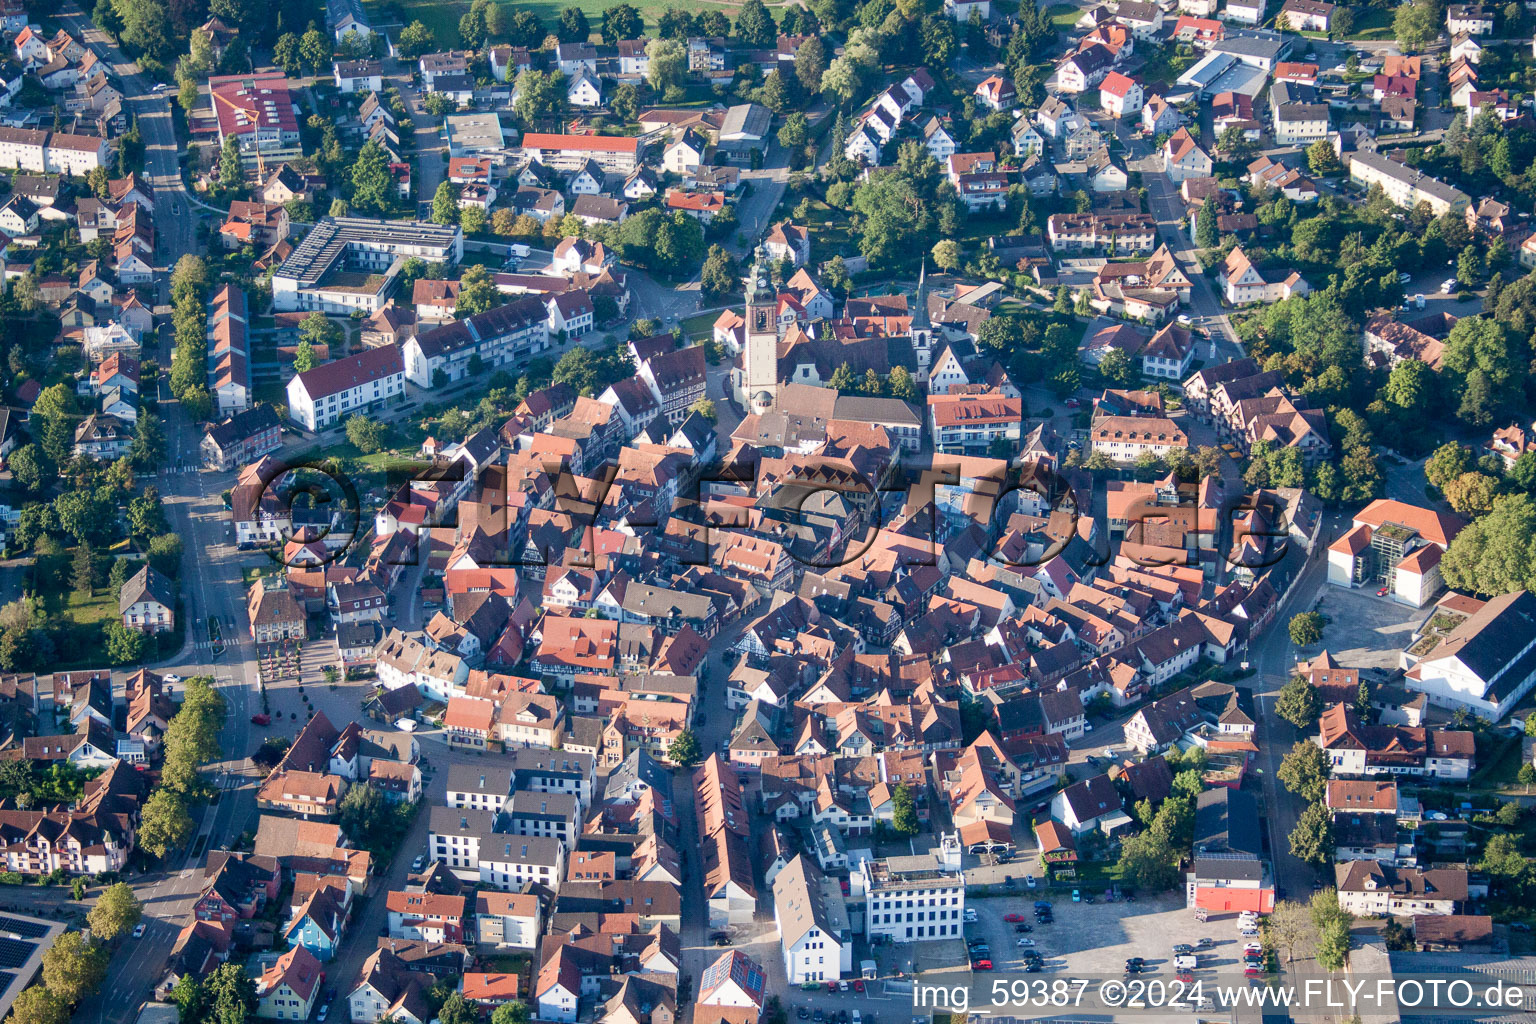 Aerial photograpy of Old Town area and city center in Haslach im Kinzigtal in the state Baden-Wurttemberg, Germany